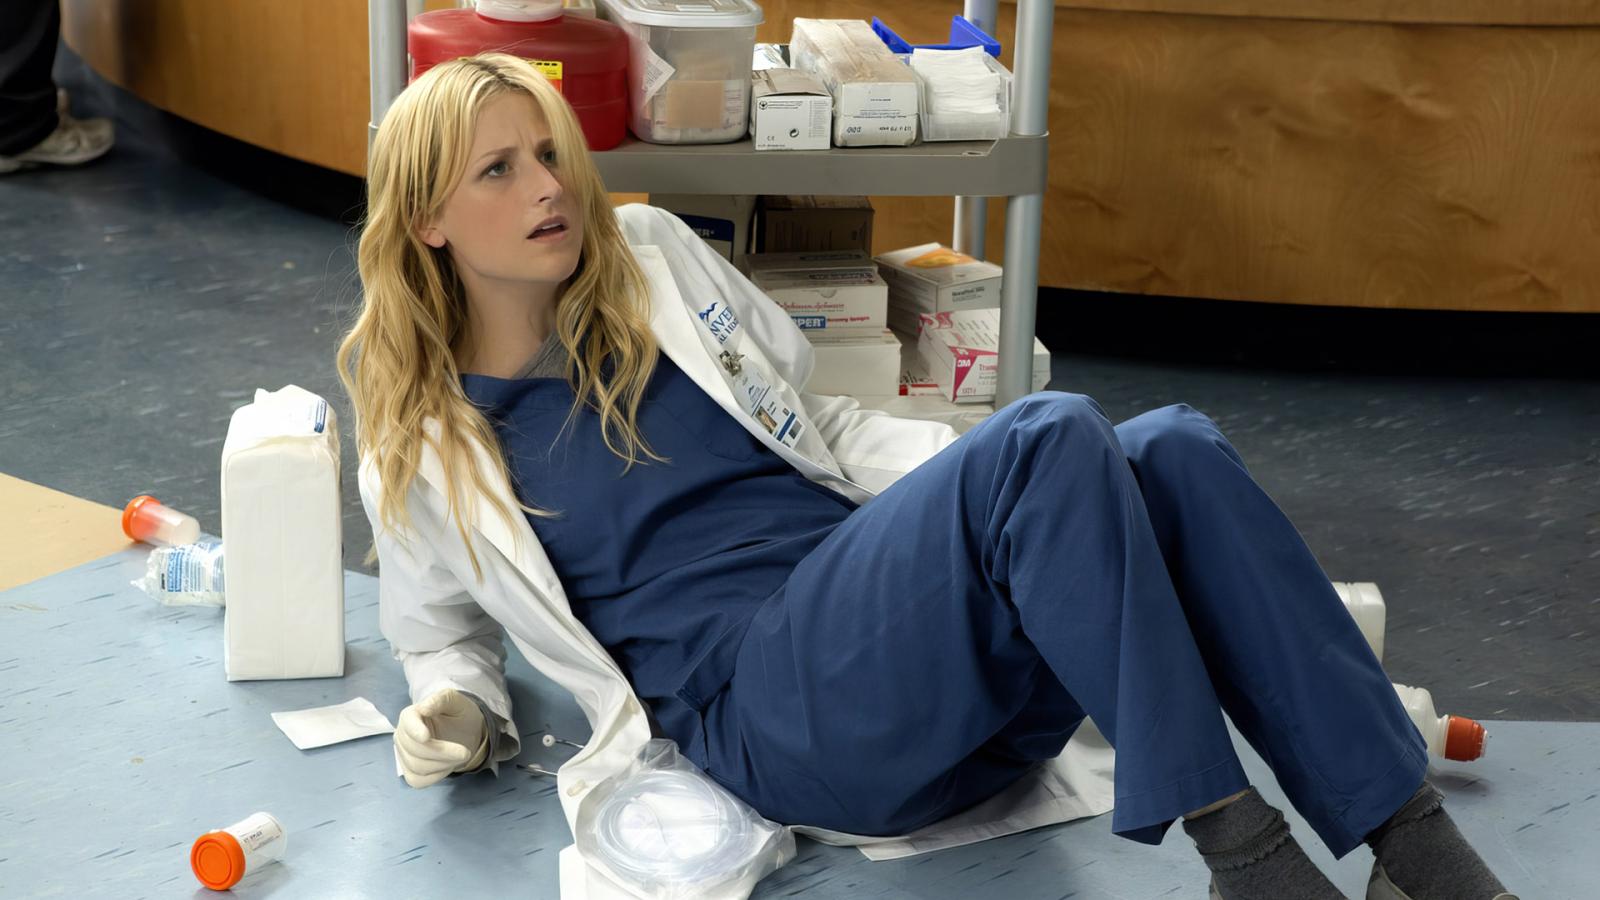 10 Lesser-Known Medical Shows to Binge Instead of Grey's Anatomy - image 10